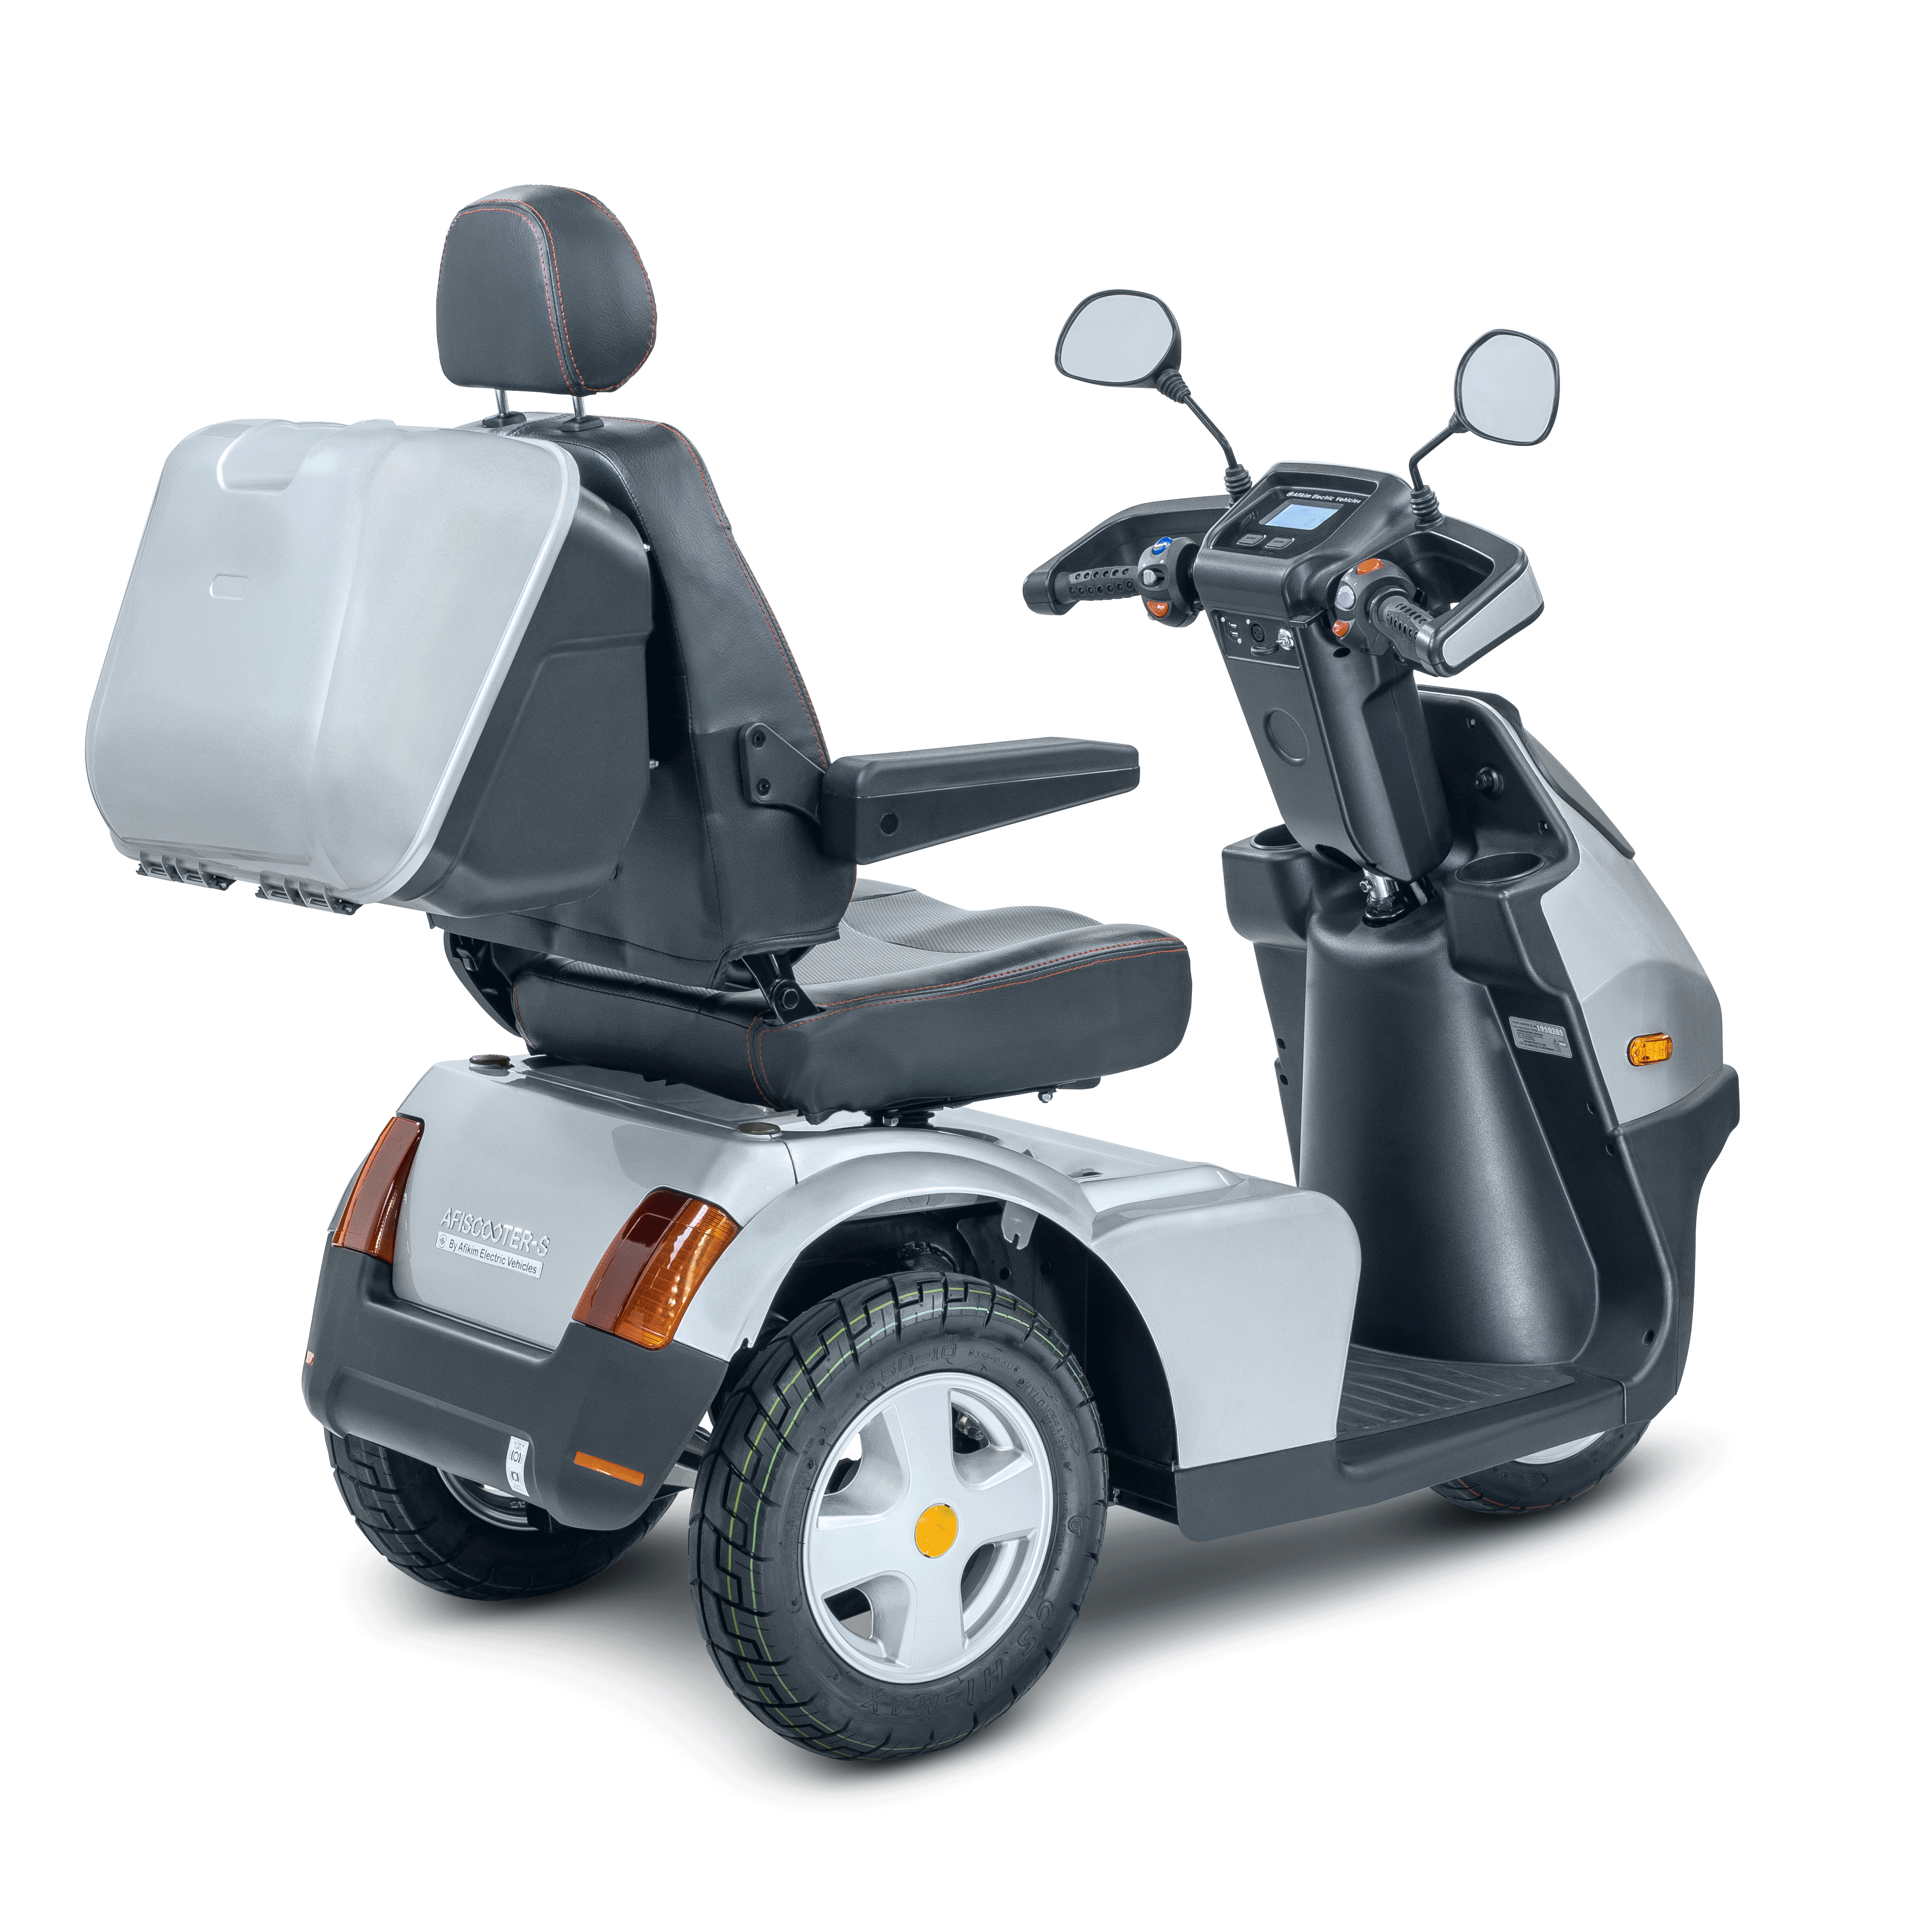 Afikim Afiscooter S3 Heavy-Duty Mobility Scooter